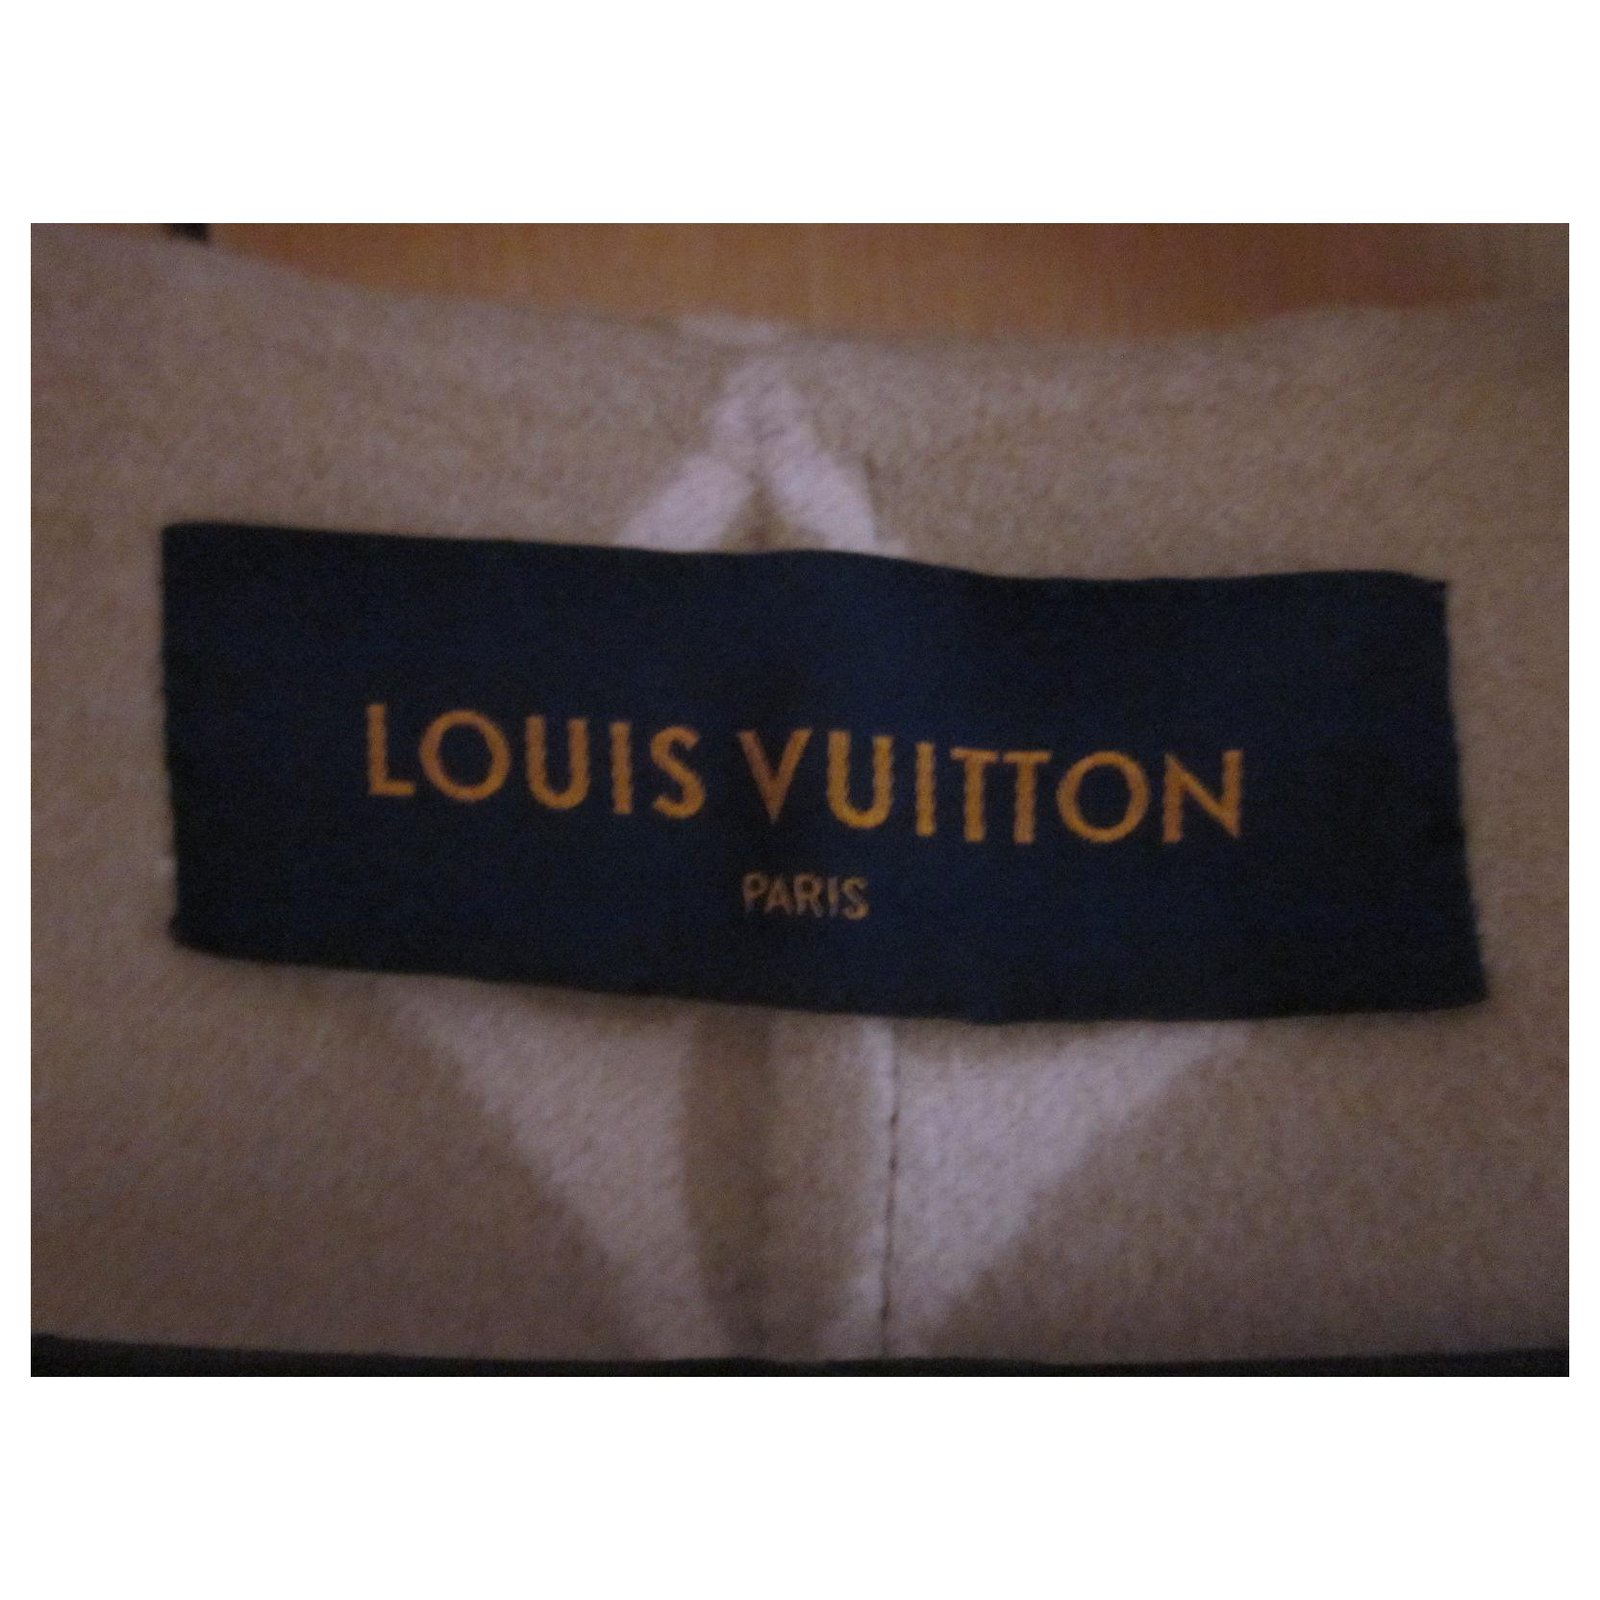 Louis Vuitton Hooded Wrap Coat Size 36 (US 4) New With Tags